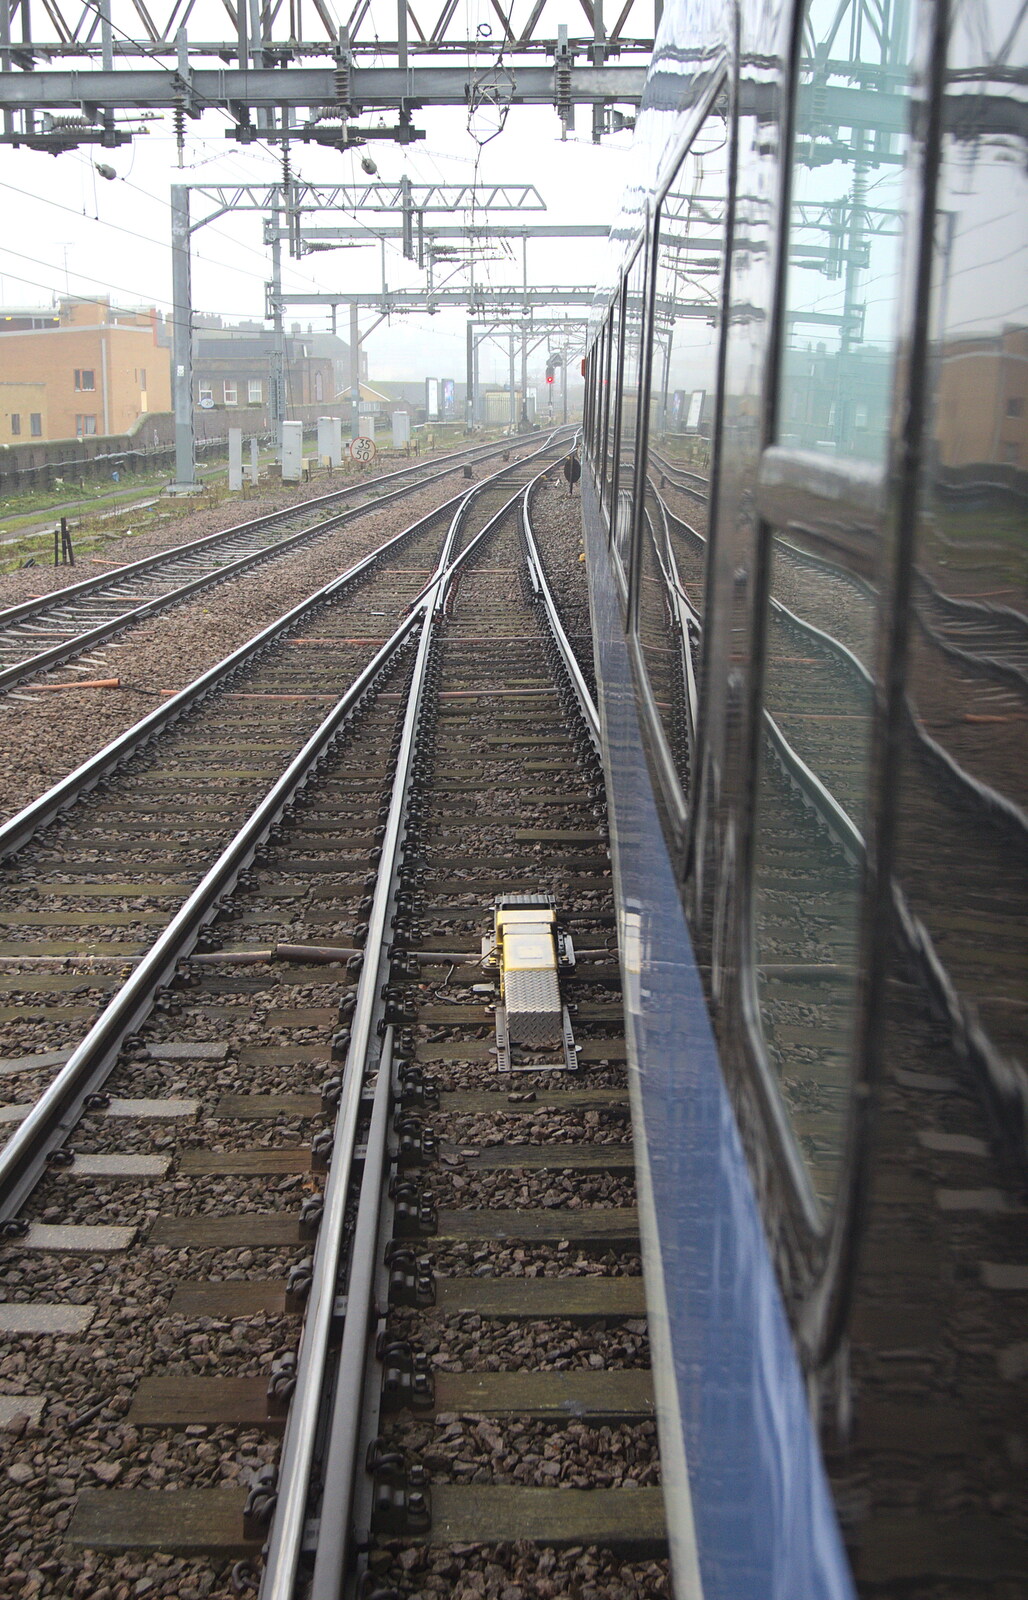 Rails reflected in the side of the train from The Demolition of the Bacon Factory, Ipswich, Suffolk - 20th February 2013